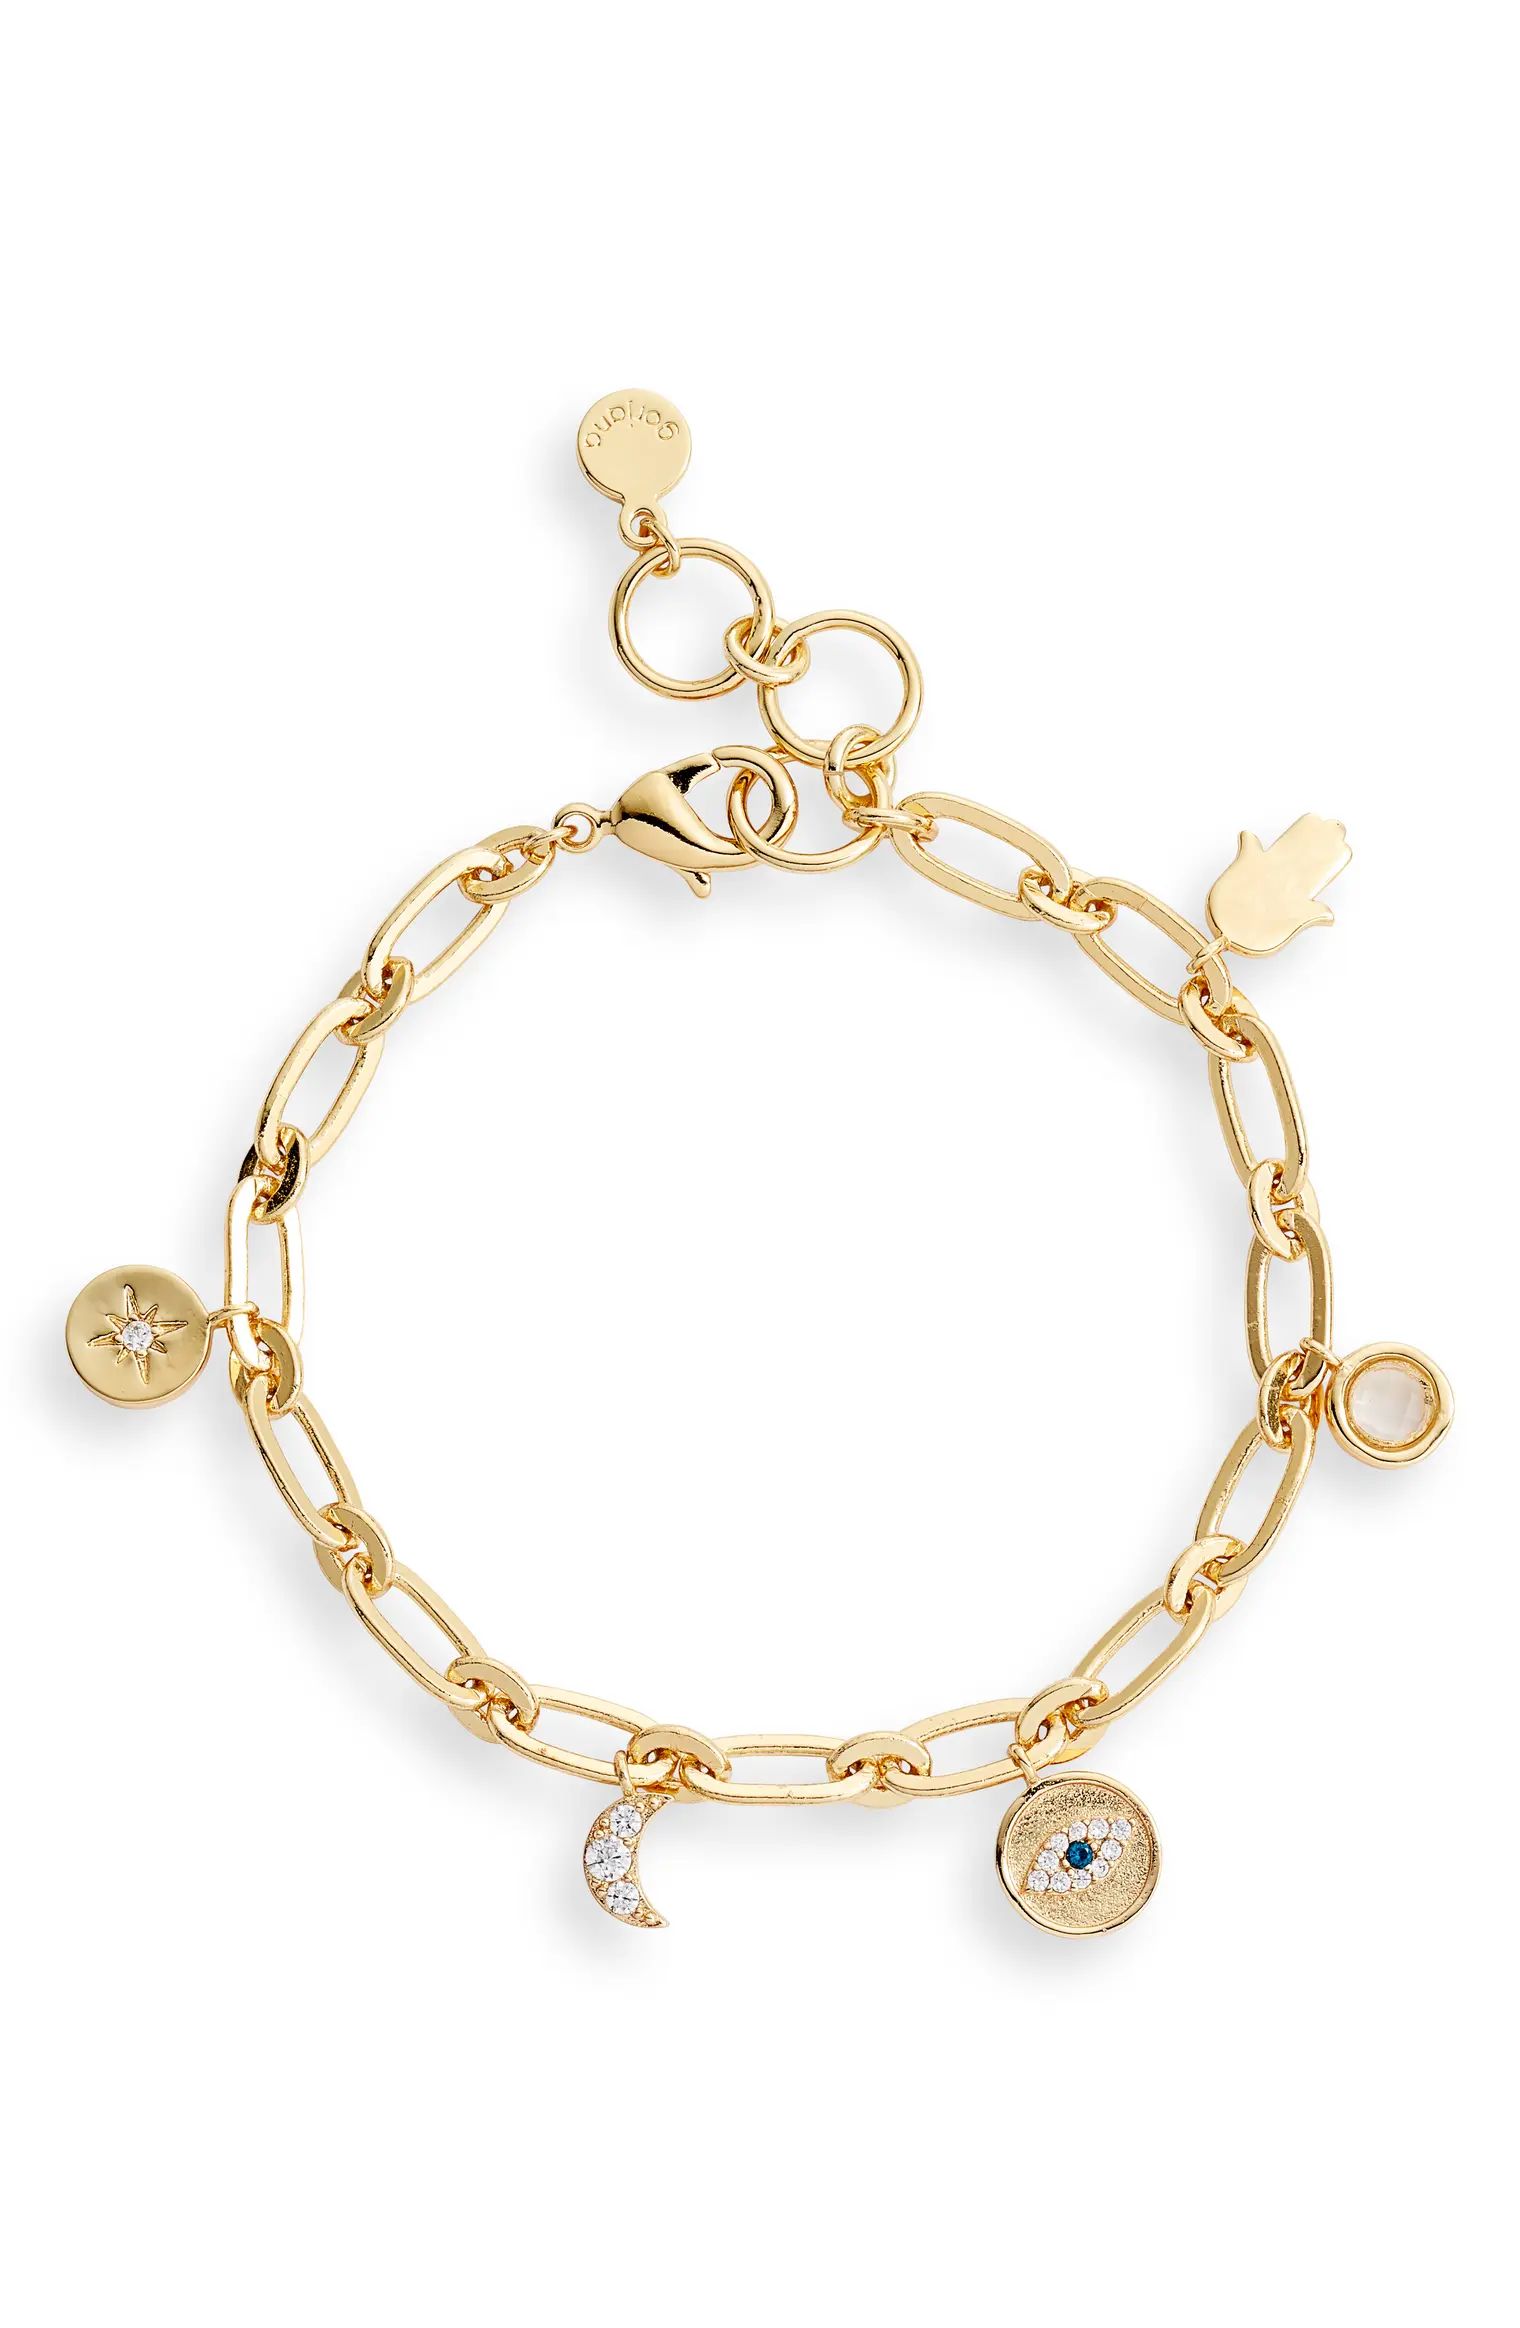 Evil Eye Charm BraceletGORJANAPrice$65.00Free ShippingSee LOOKSGold1Price$65.0023 people are view... | Nordstrom